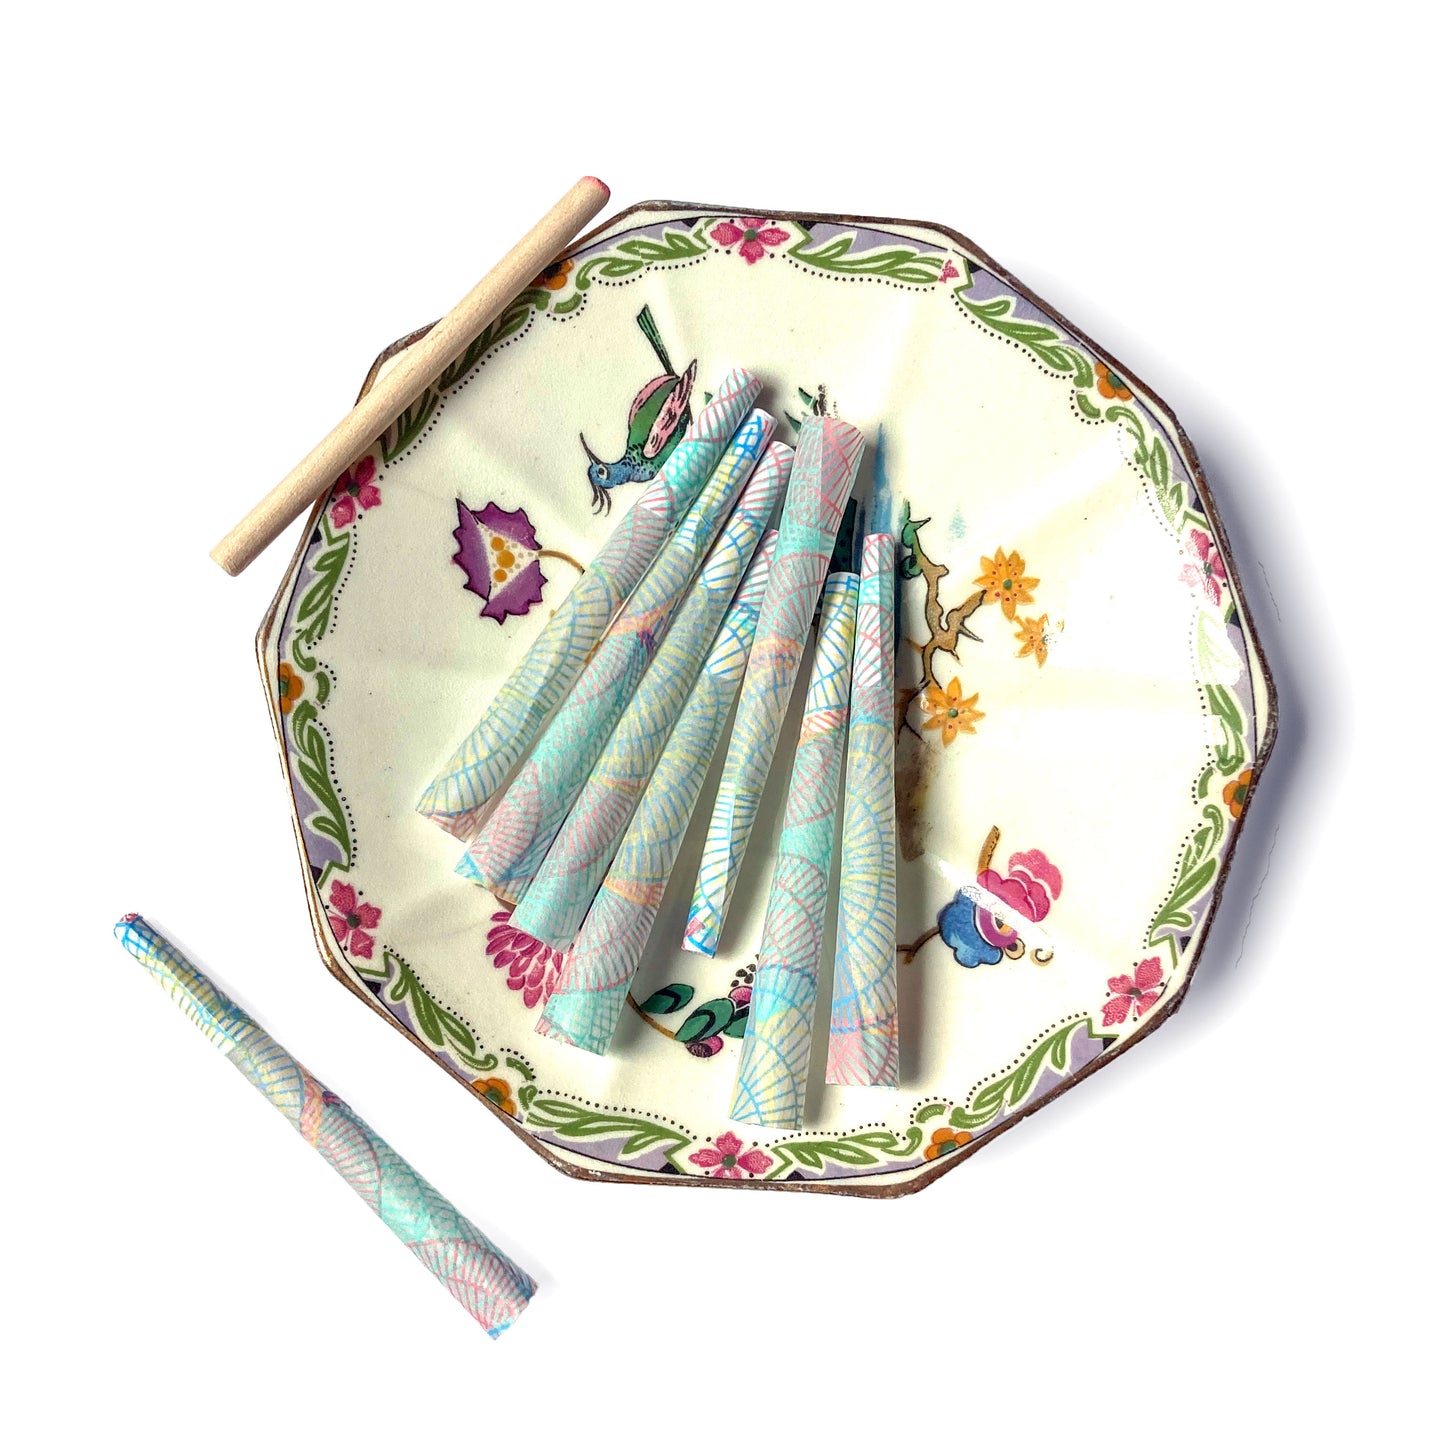 Set of 8 Heartbreaker pre-roll cones: spiral printed cones. These designer pre-rolled cones are girly, pretty, vegan, cute, cool, standard size, high quality, even burn, natural dyes, best tasting, slow burn.